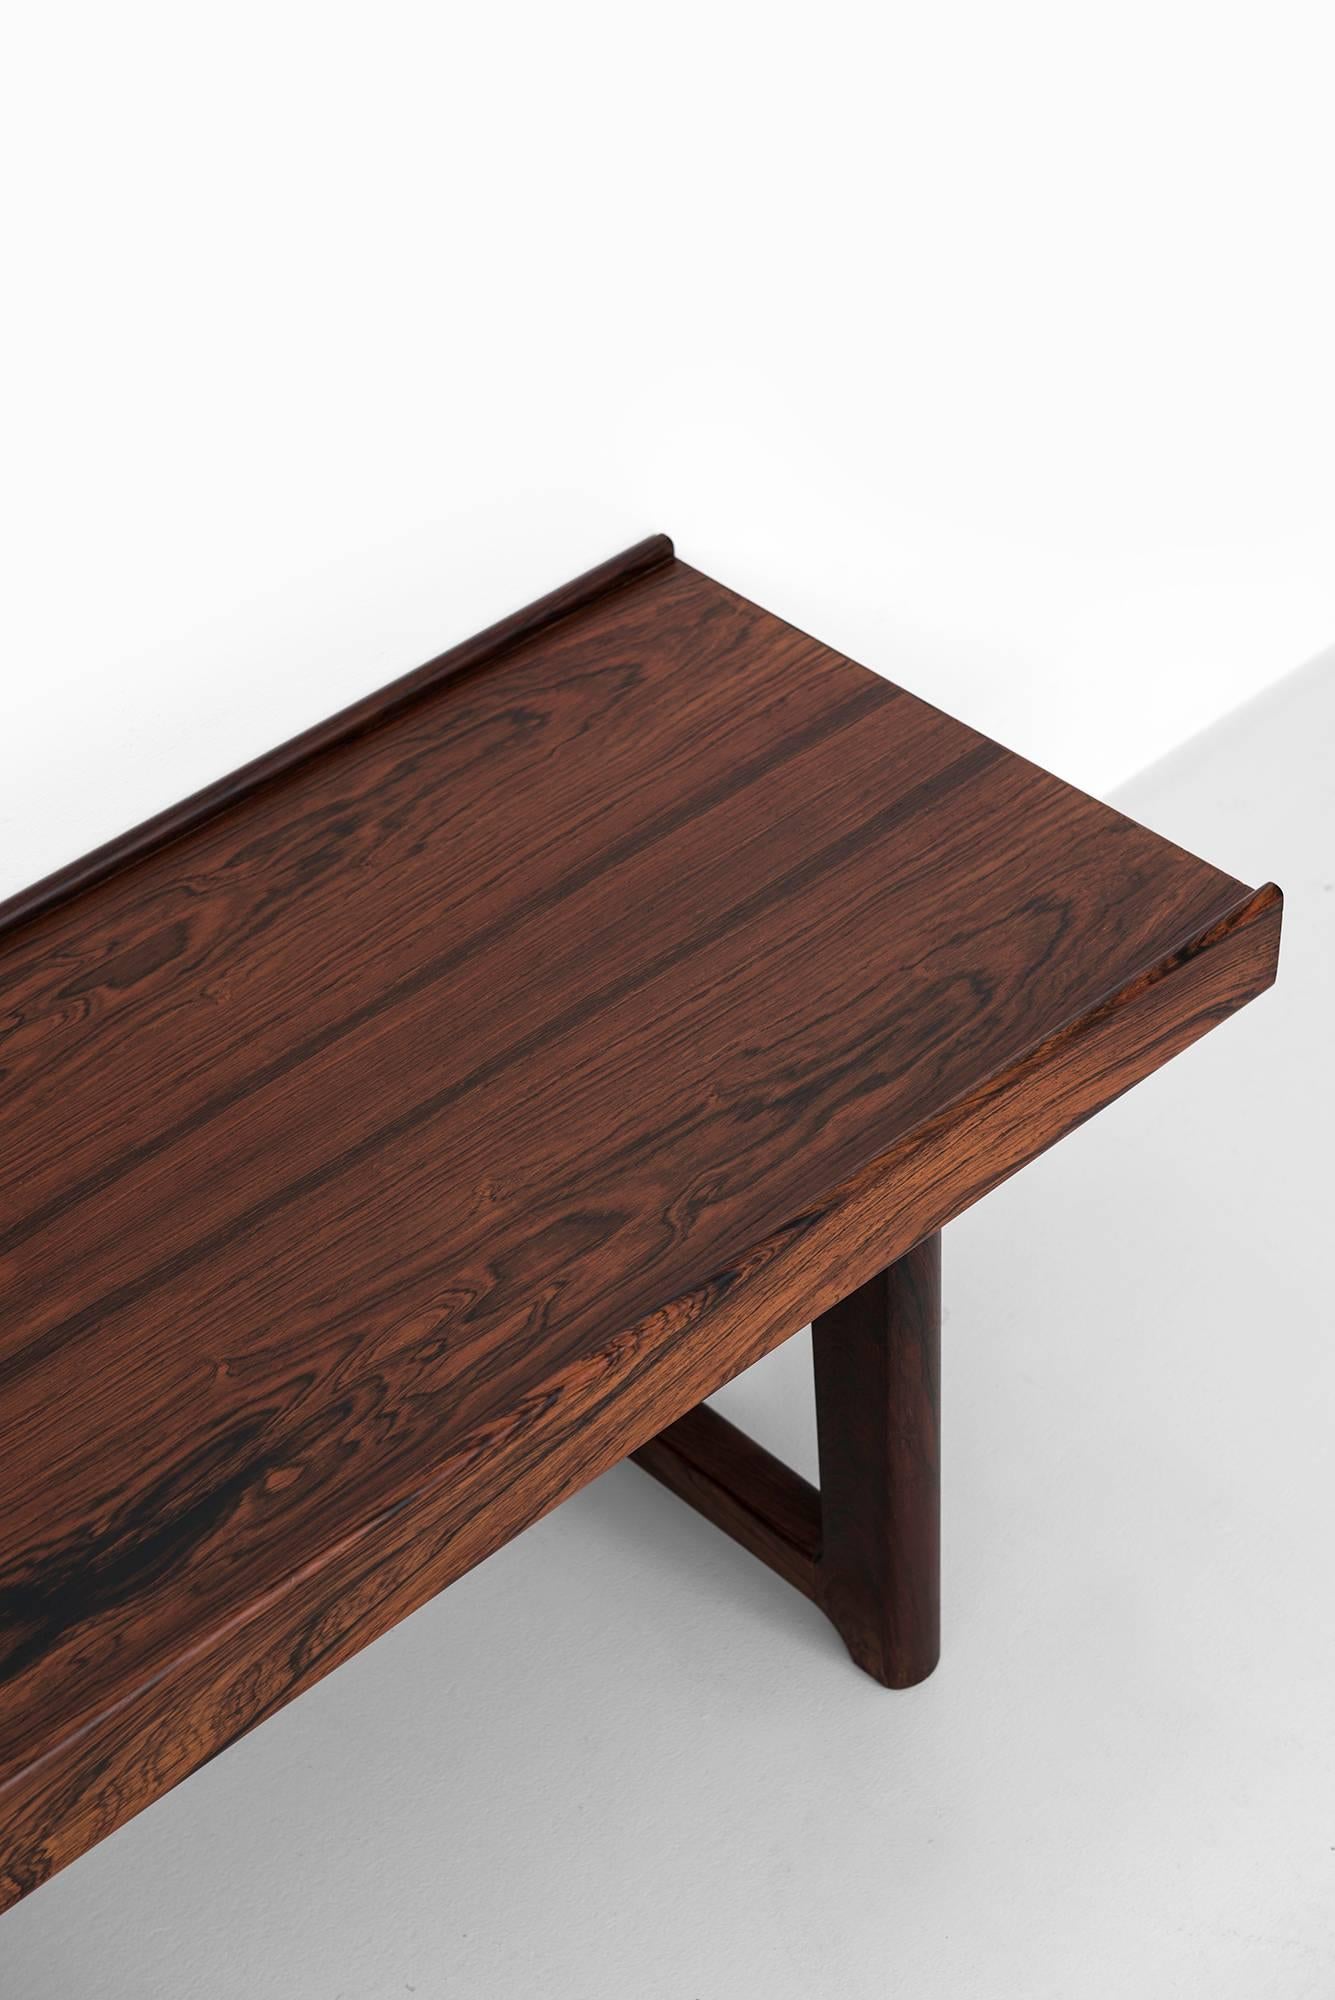 Bench / side table model Krobo with drawer box designed by Torbjørn Afdal. Produced by Bruksbo in Norway.